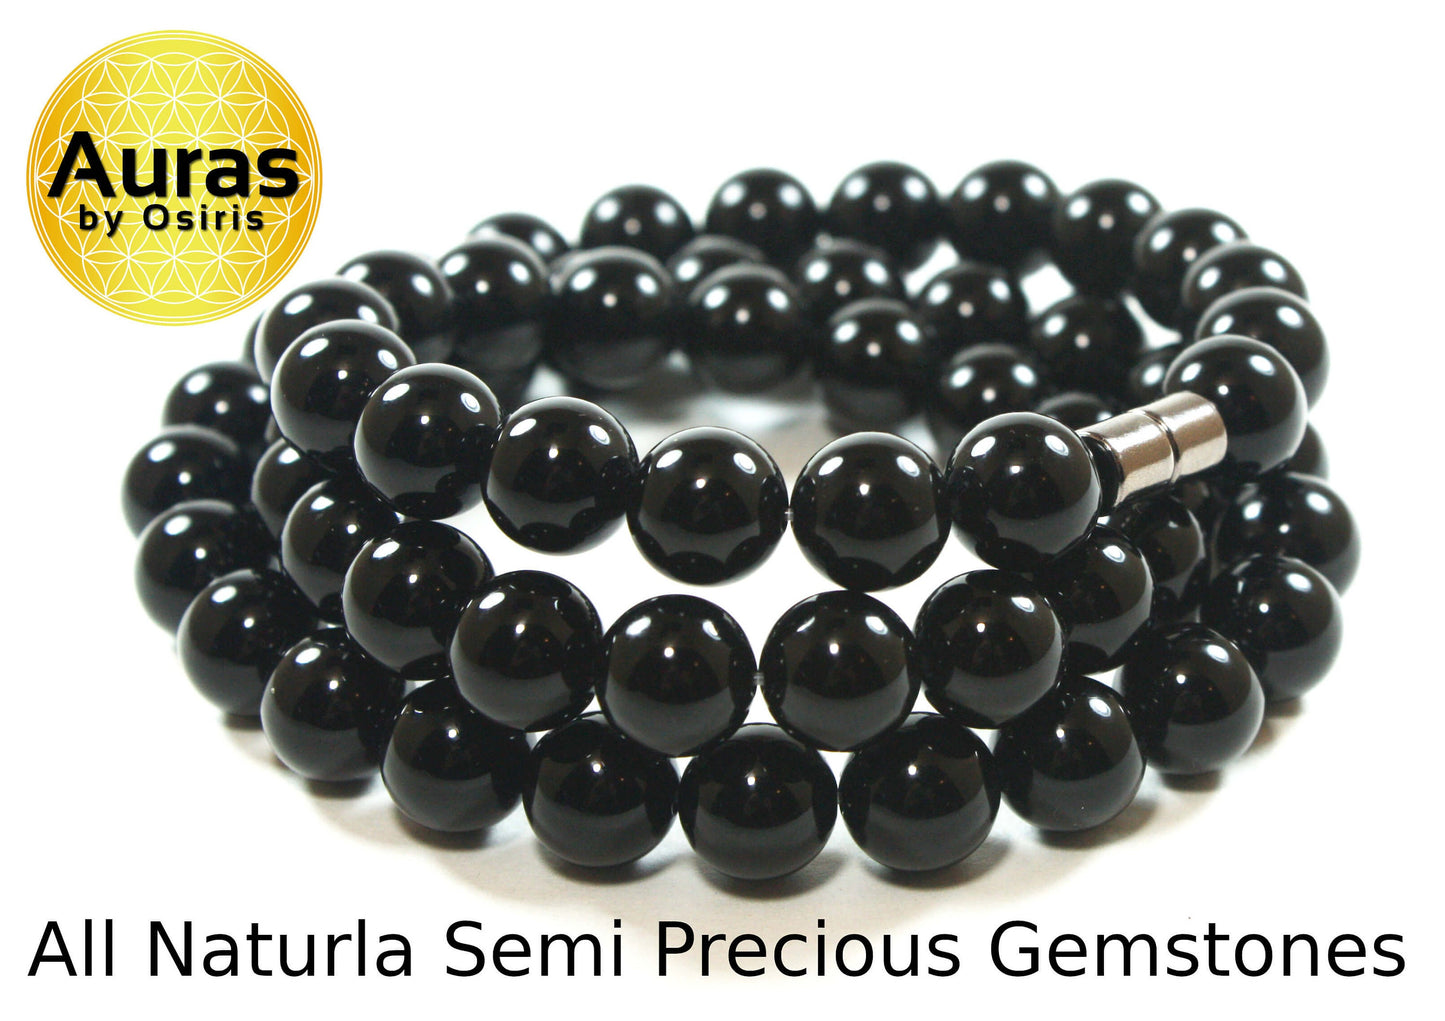 10mm Black Onyx Necklace - EMF Protection Jewelry - Empath Protection - Necklaces for Women/Men - Protection Stones with Magnetic clasp